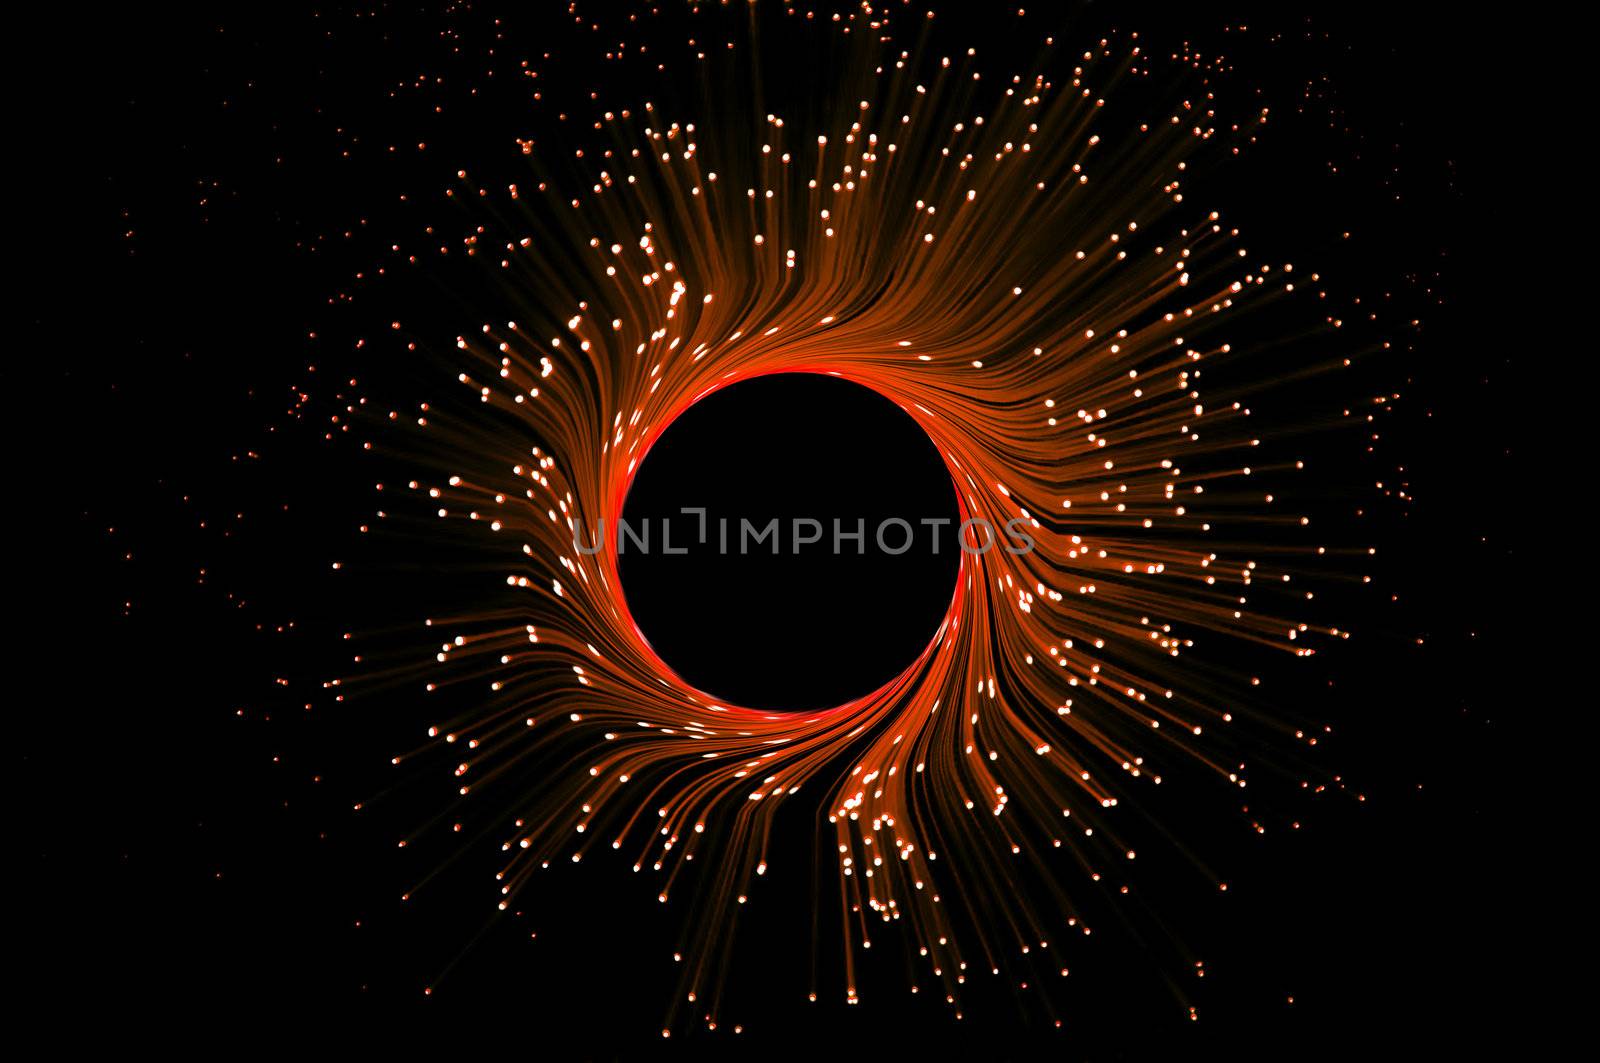 Many illuminated red and orange fiber optic light strands in a ring formation against black.